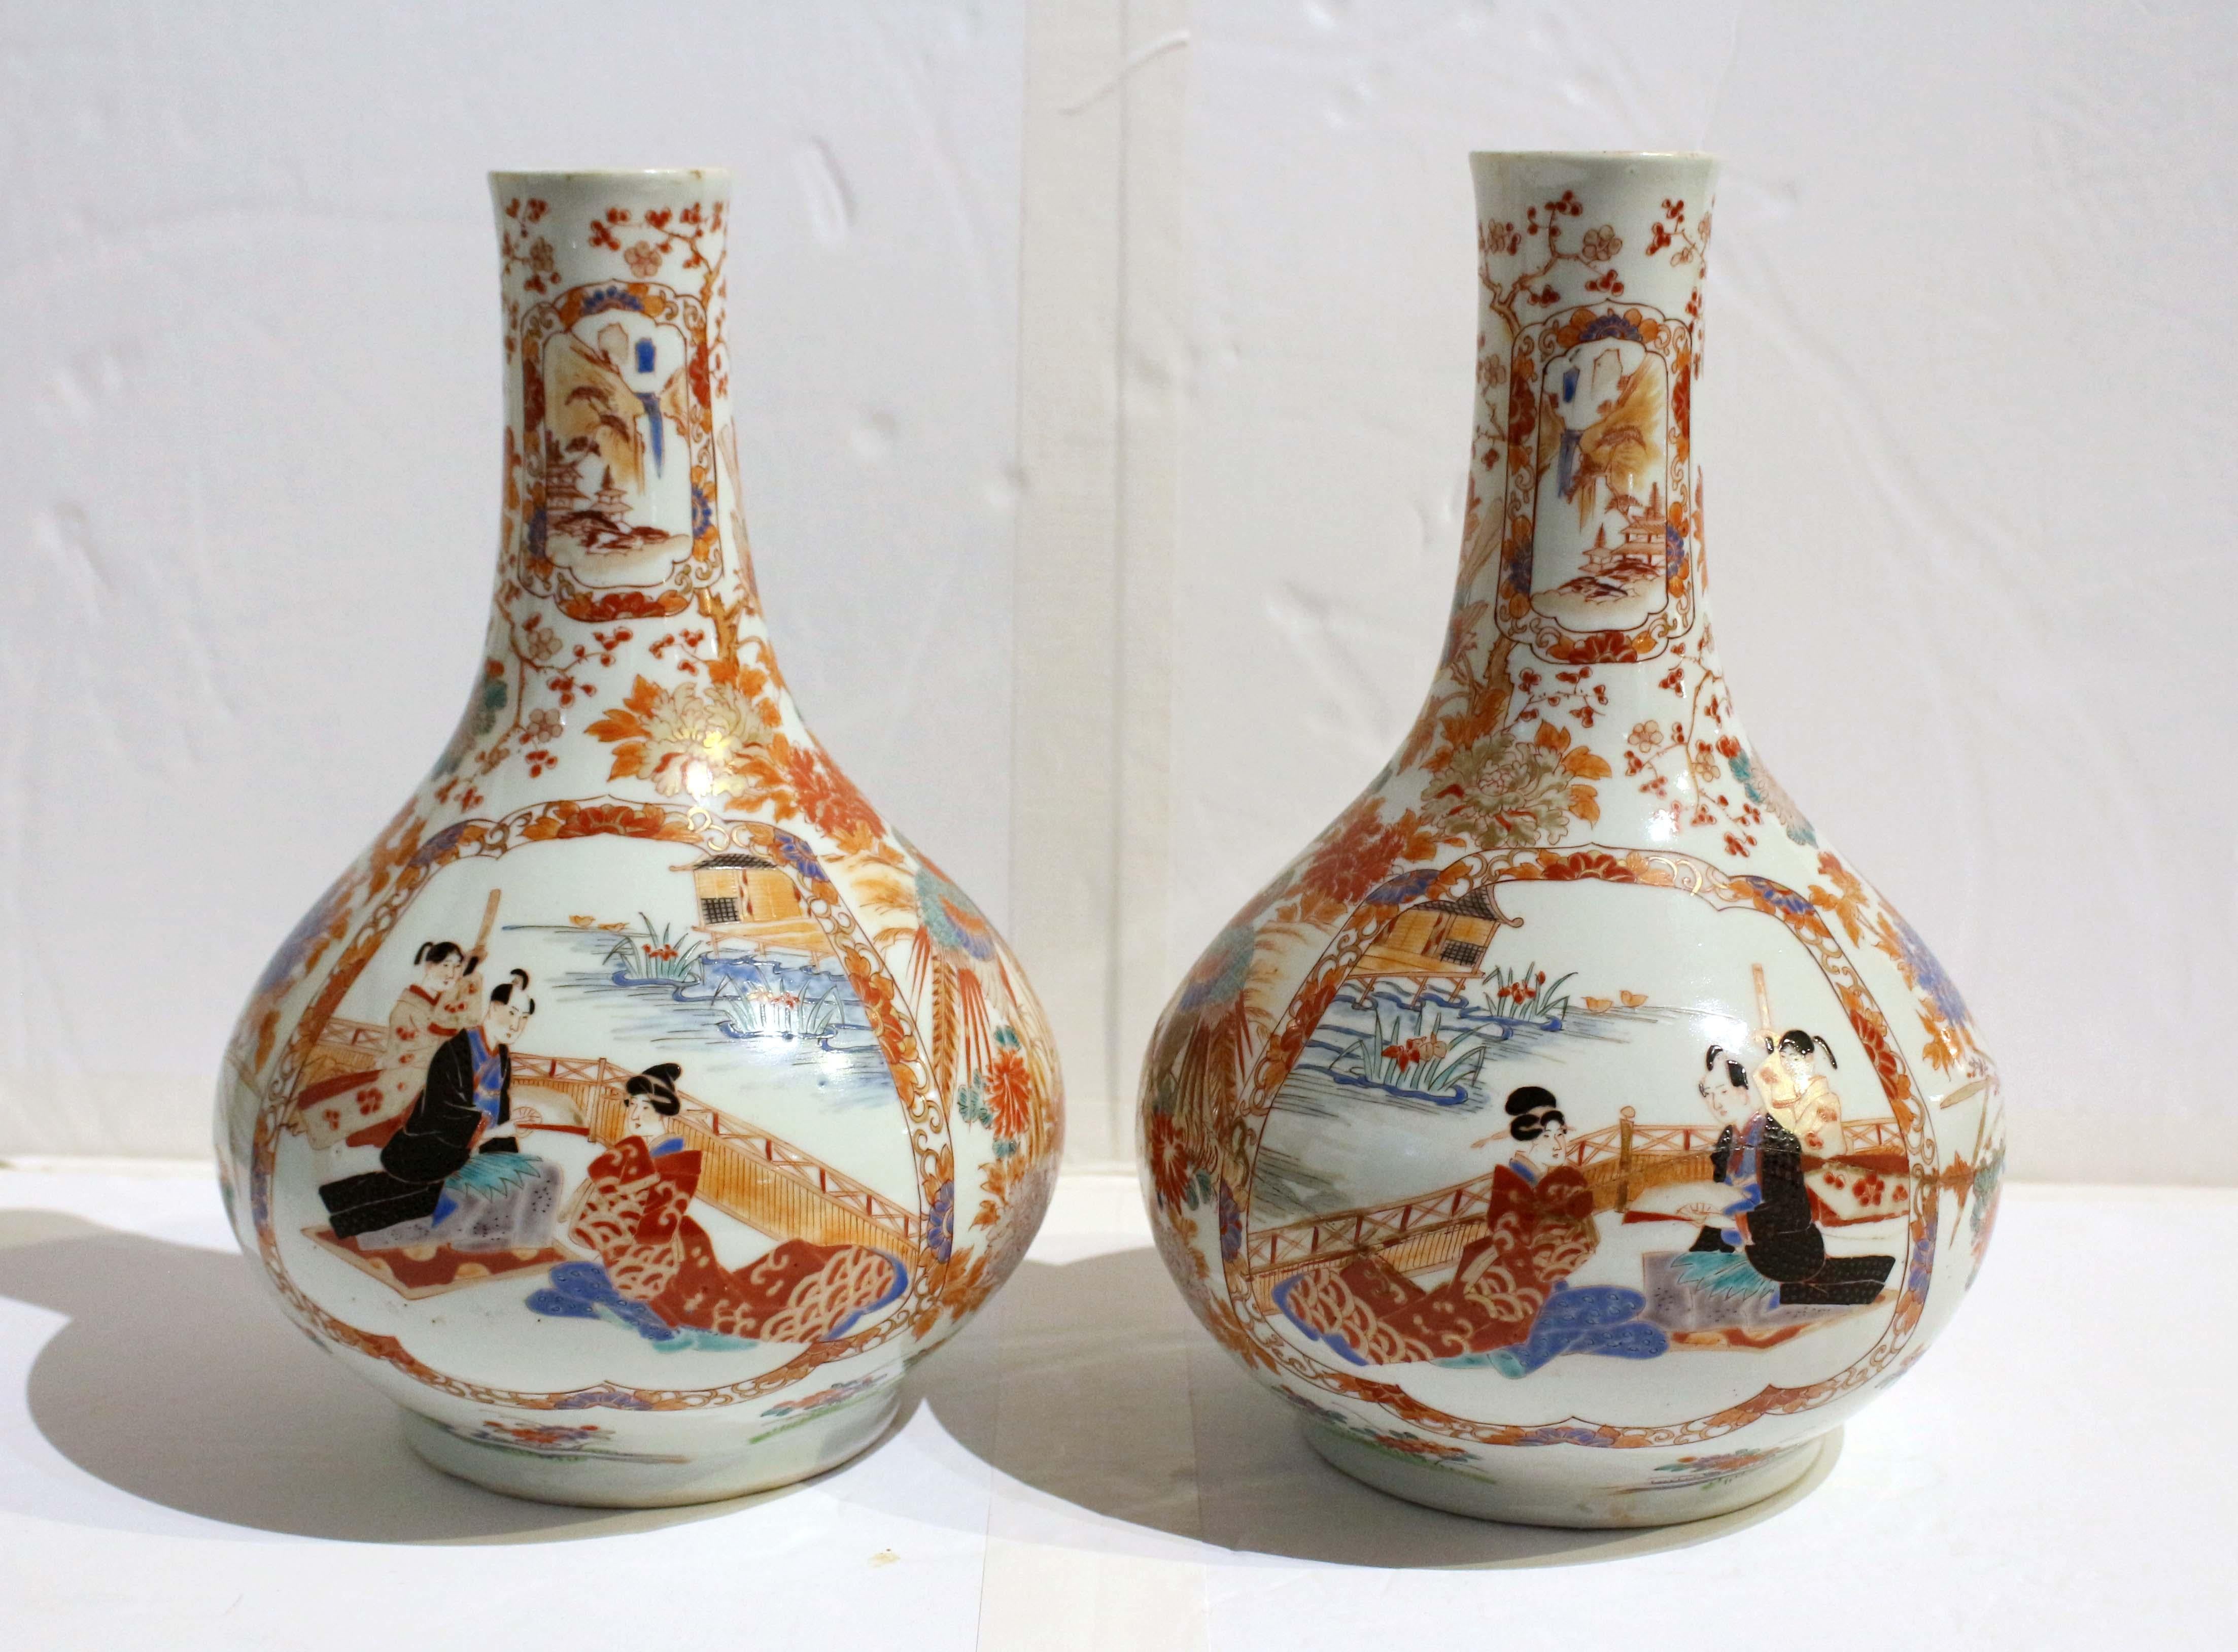 Circa 1890 pair of Imari vases, Japanese. Bulbous form. A true facing pair. Each with large opposing central medallions featuring a man with a fan with assistant behind with his sheathed sword and seated lady in long robe beside the water under a